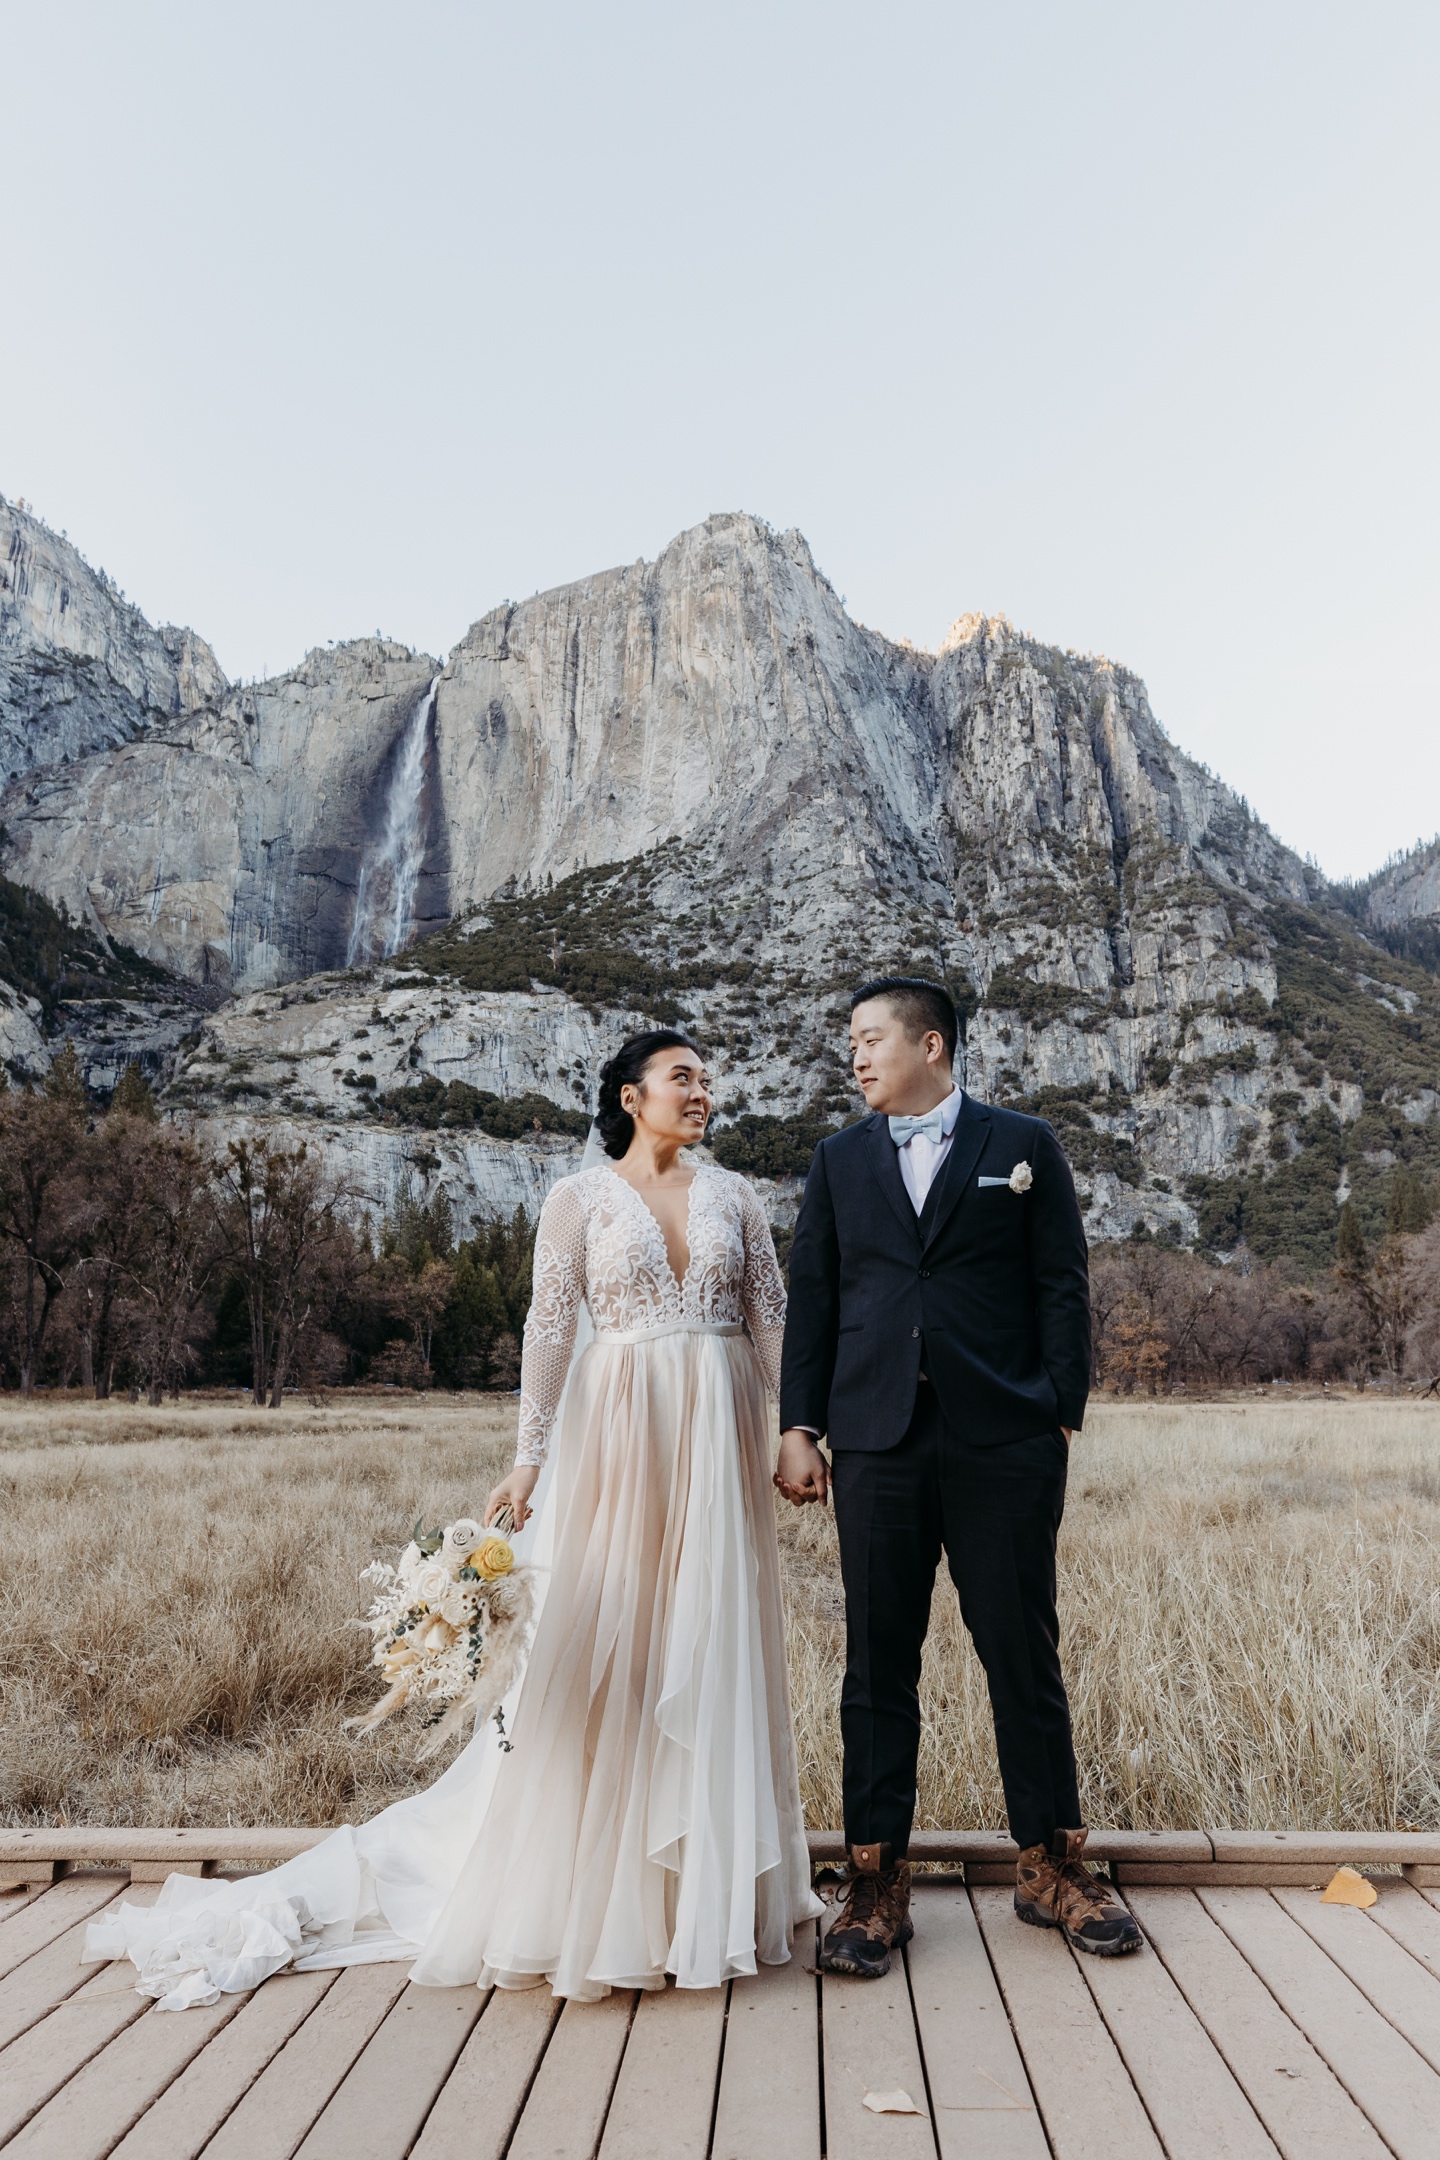 Bride and groom hold hands on a wood walking path in front of Yosemite Falls after their Yosemite wedding.